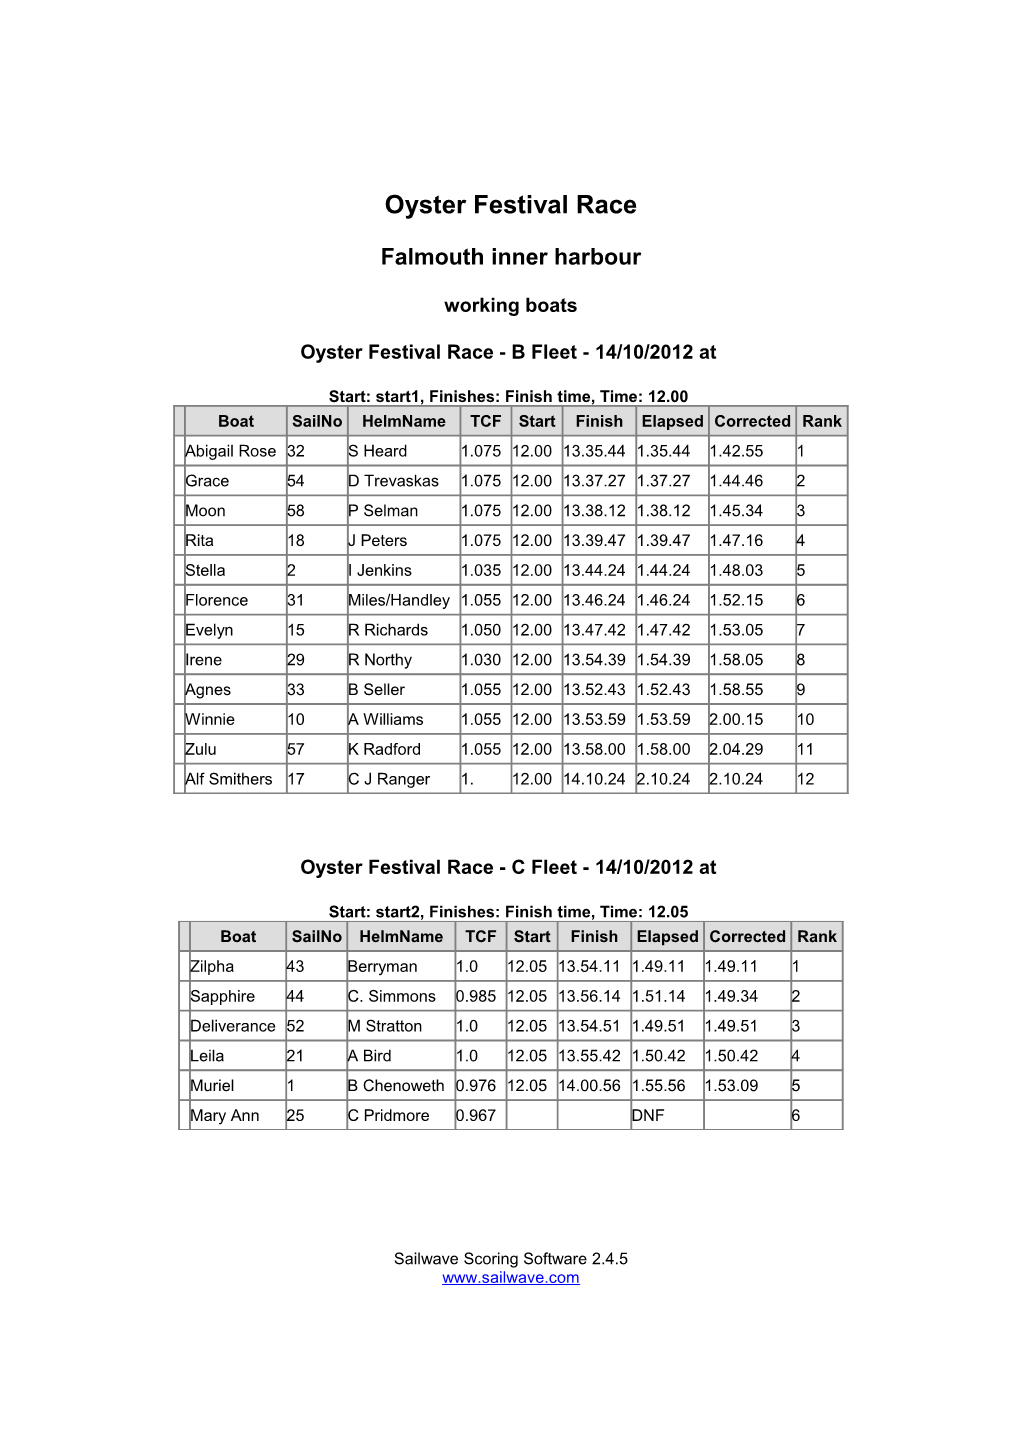 Sailwave Results for Oyster Festival Race - Falmouth Inner Harbour